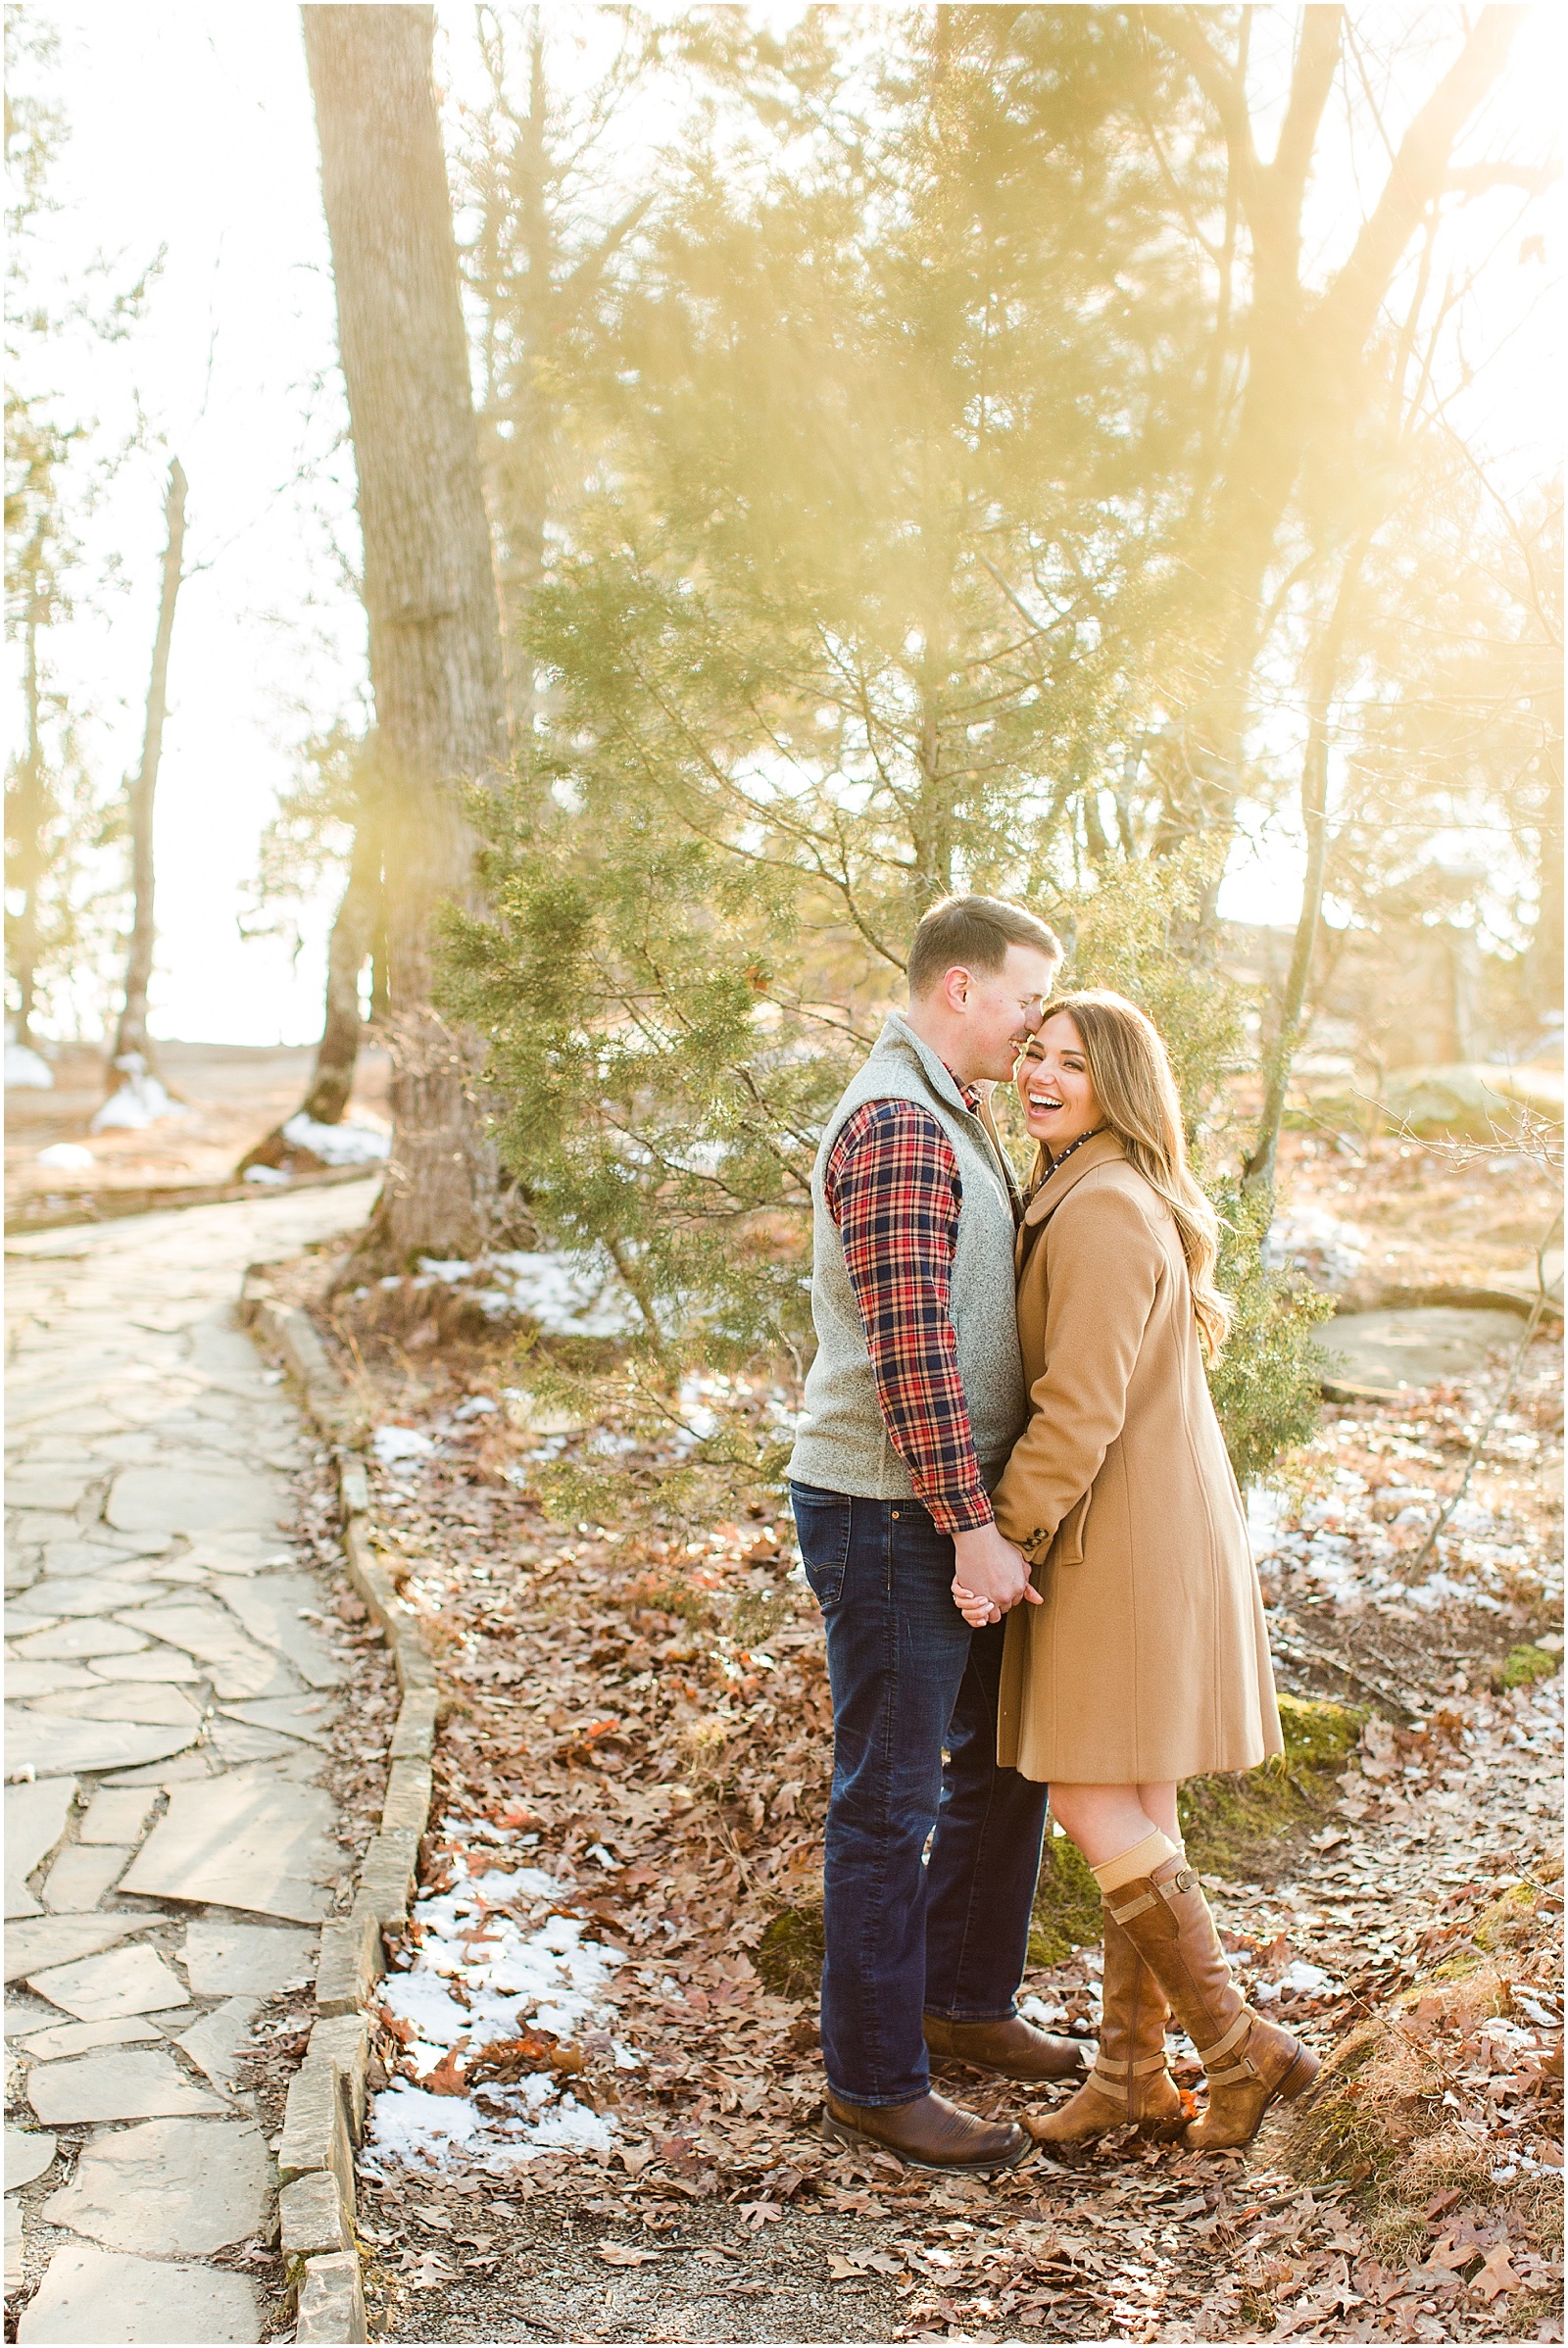 A Sunny Garden of the Gods Engagement Session | Shiloh and Lee | Bret and Brandie Photography025.jpg